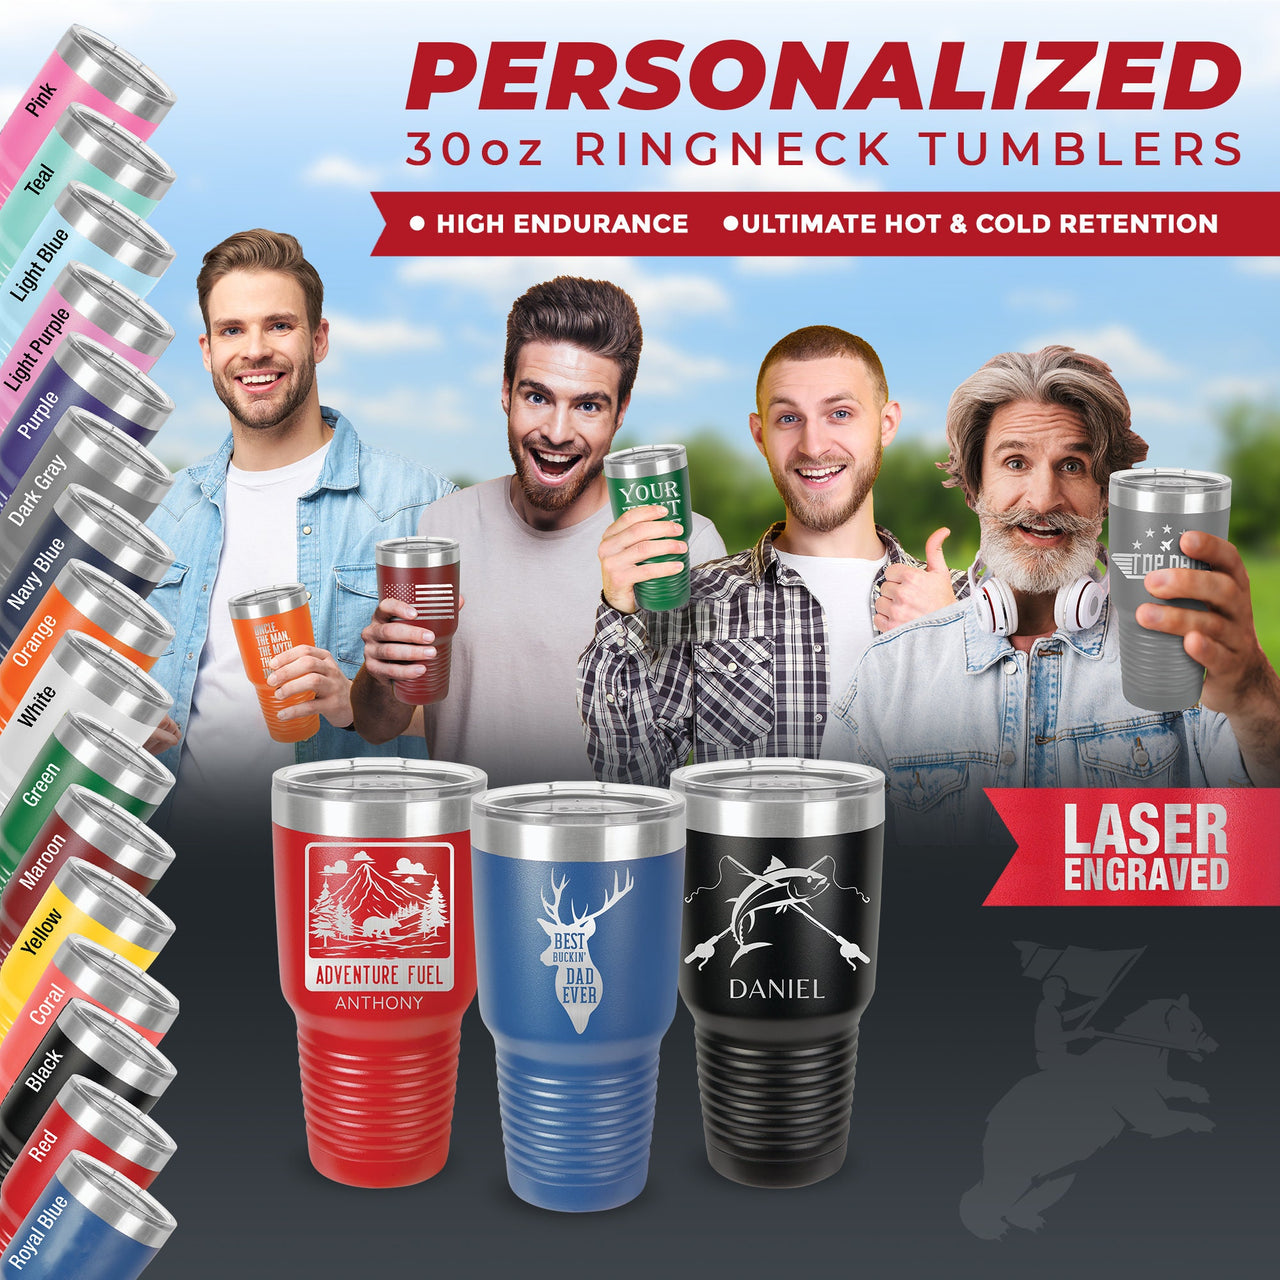 Limited Edition Mostly Original Parts Custom Tumbler Gifts